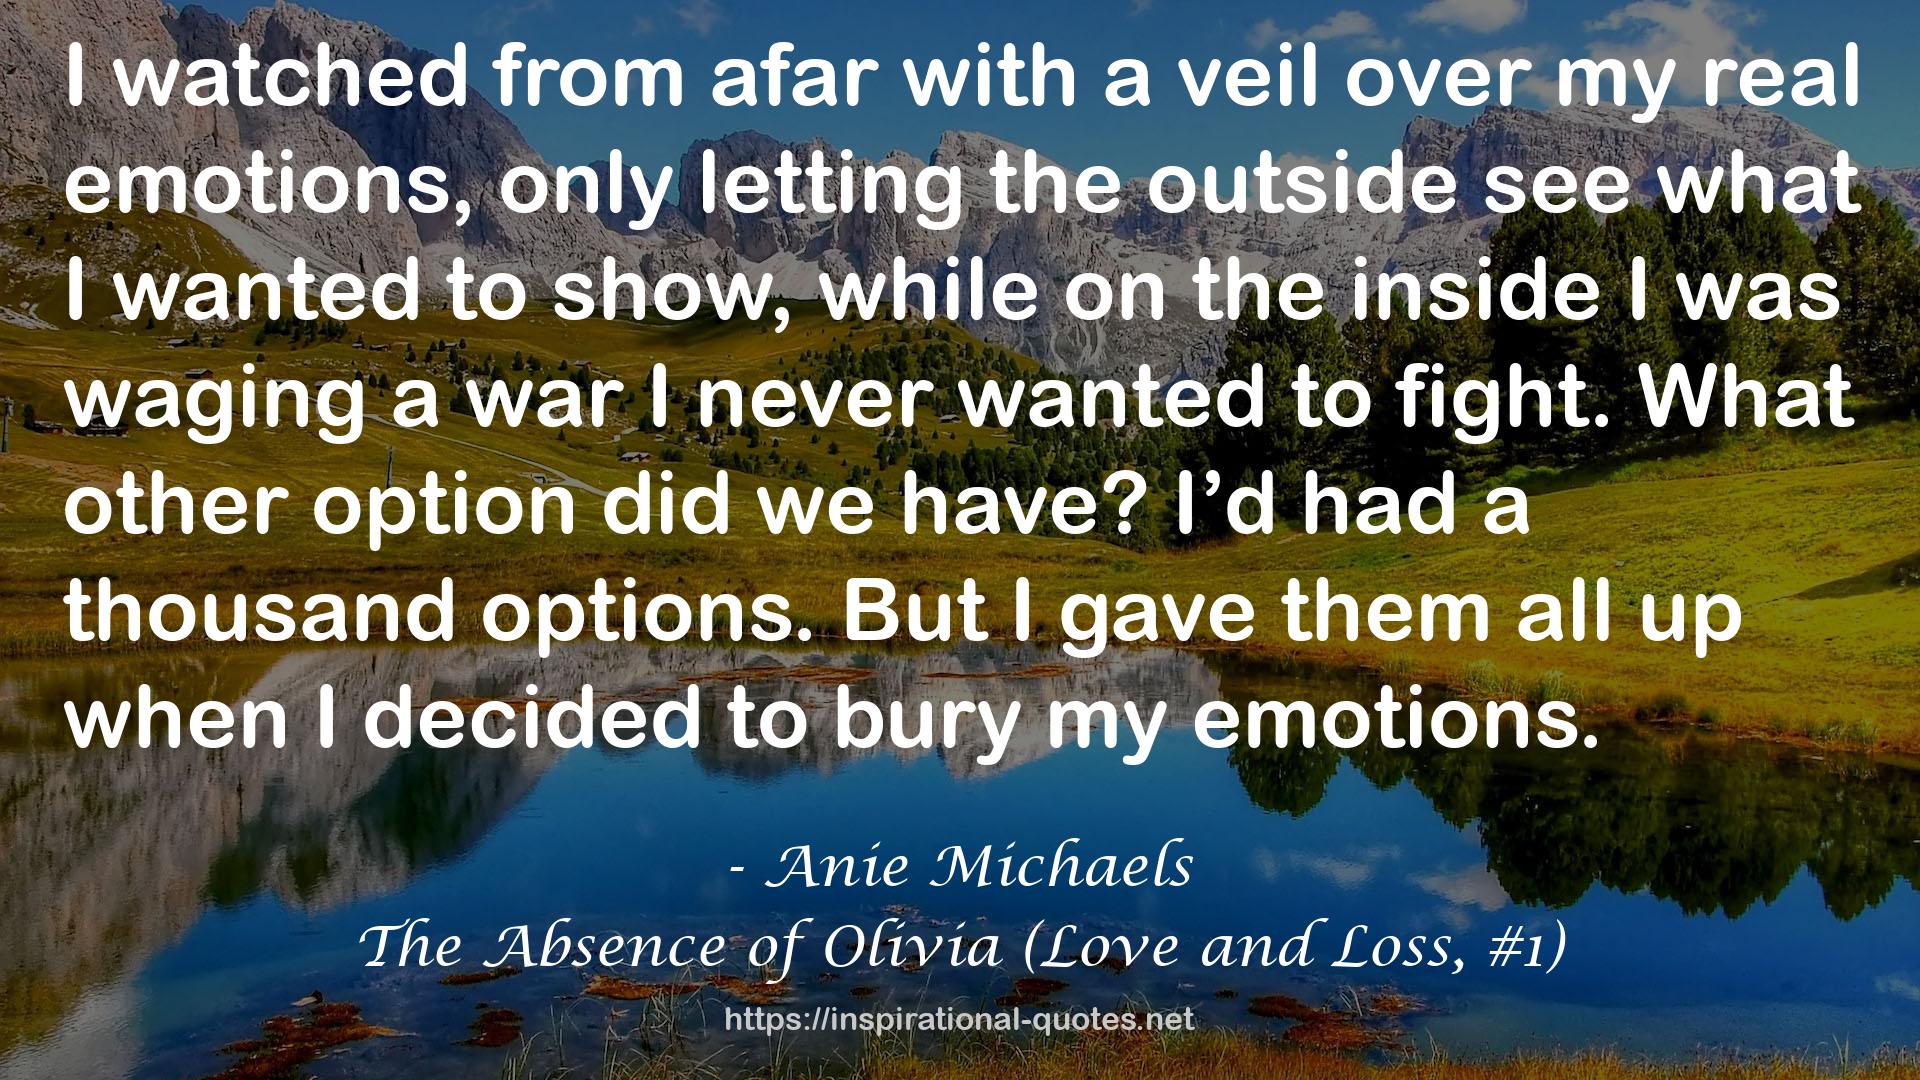 The Absence of Olivia (Love and Loss, #1) QUOTES